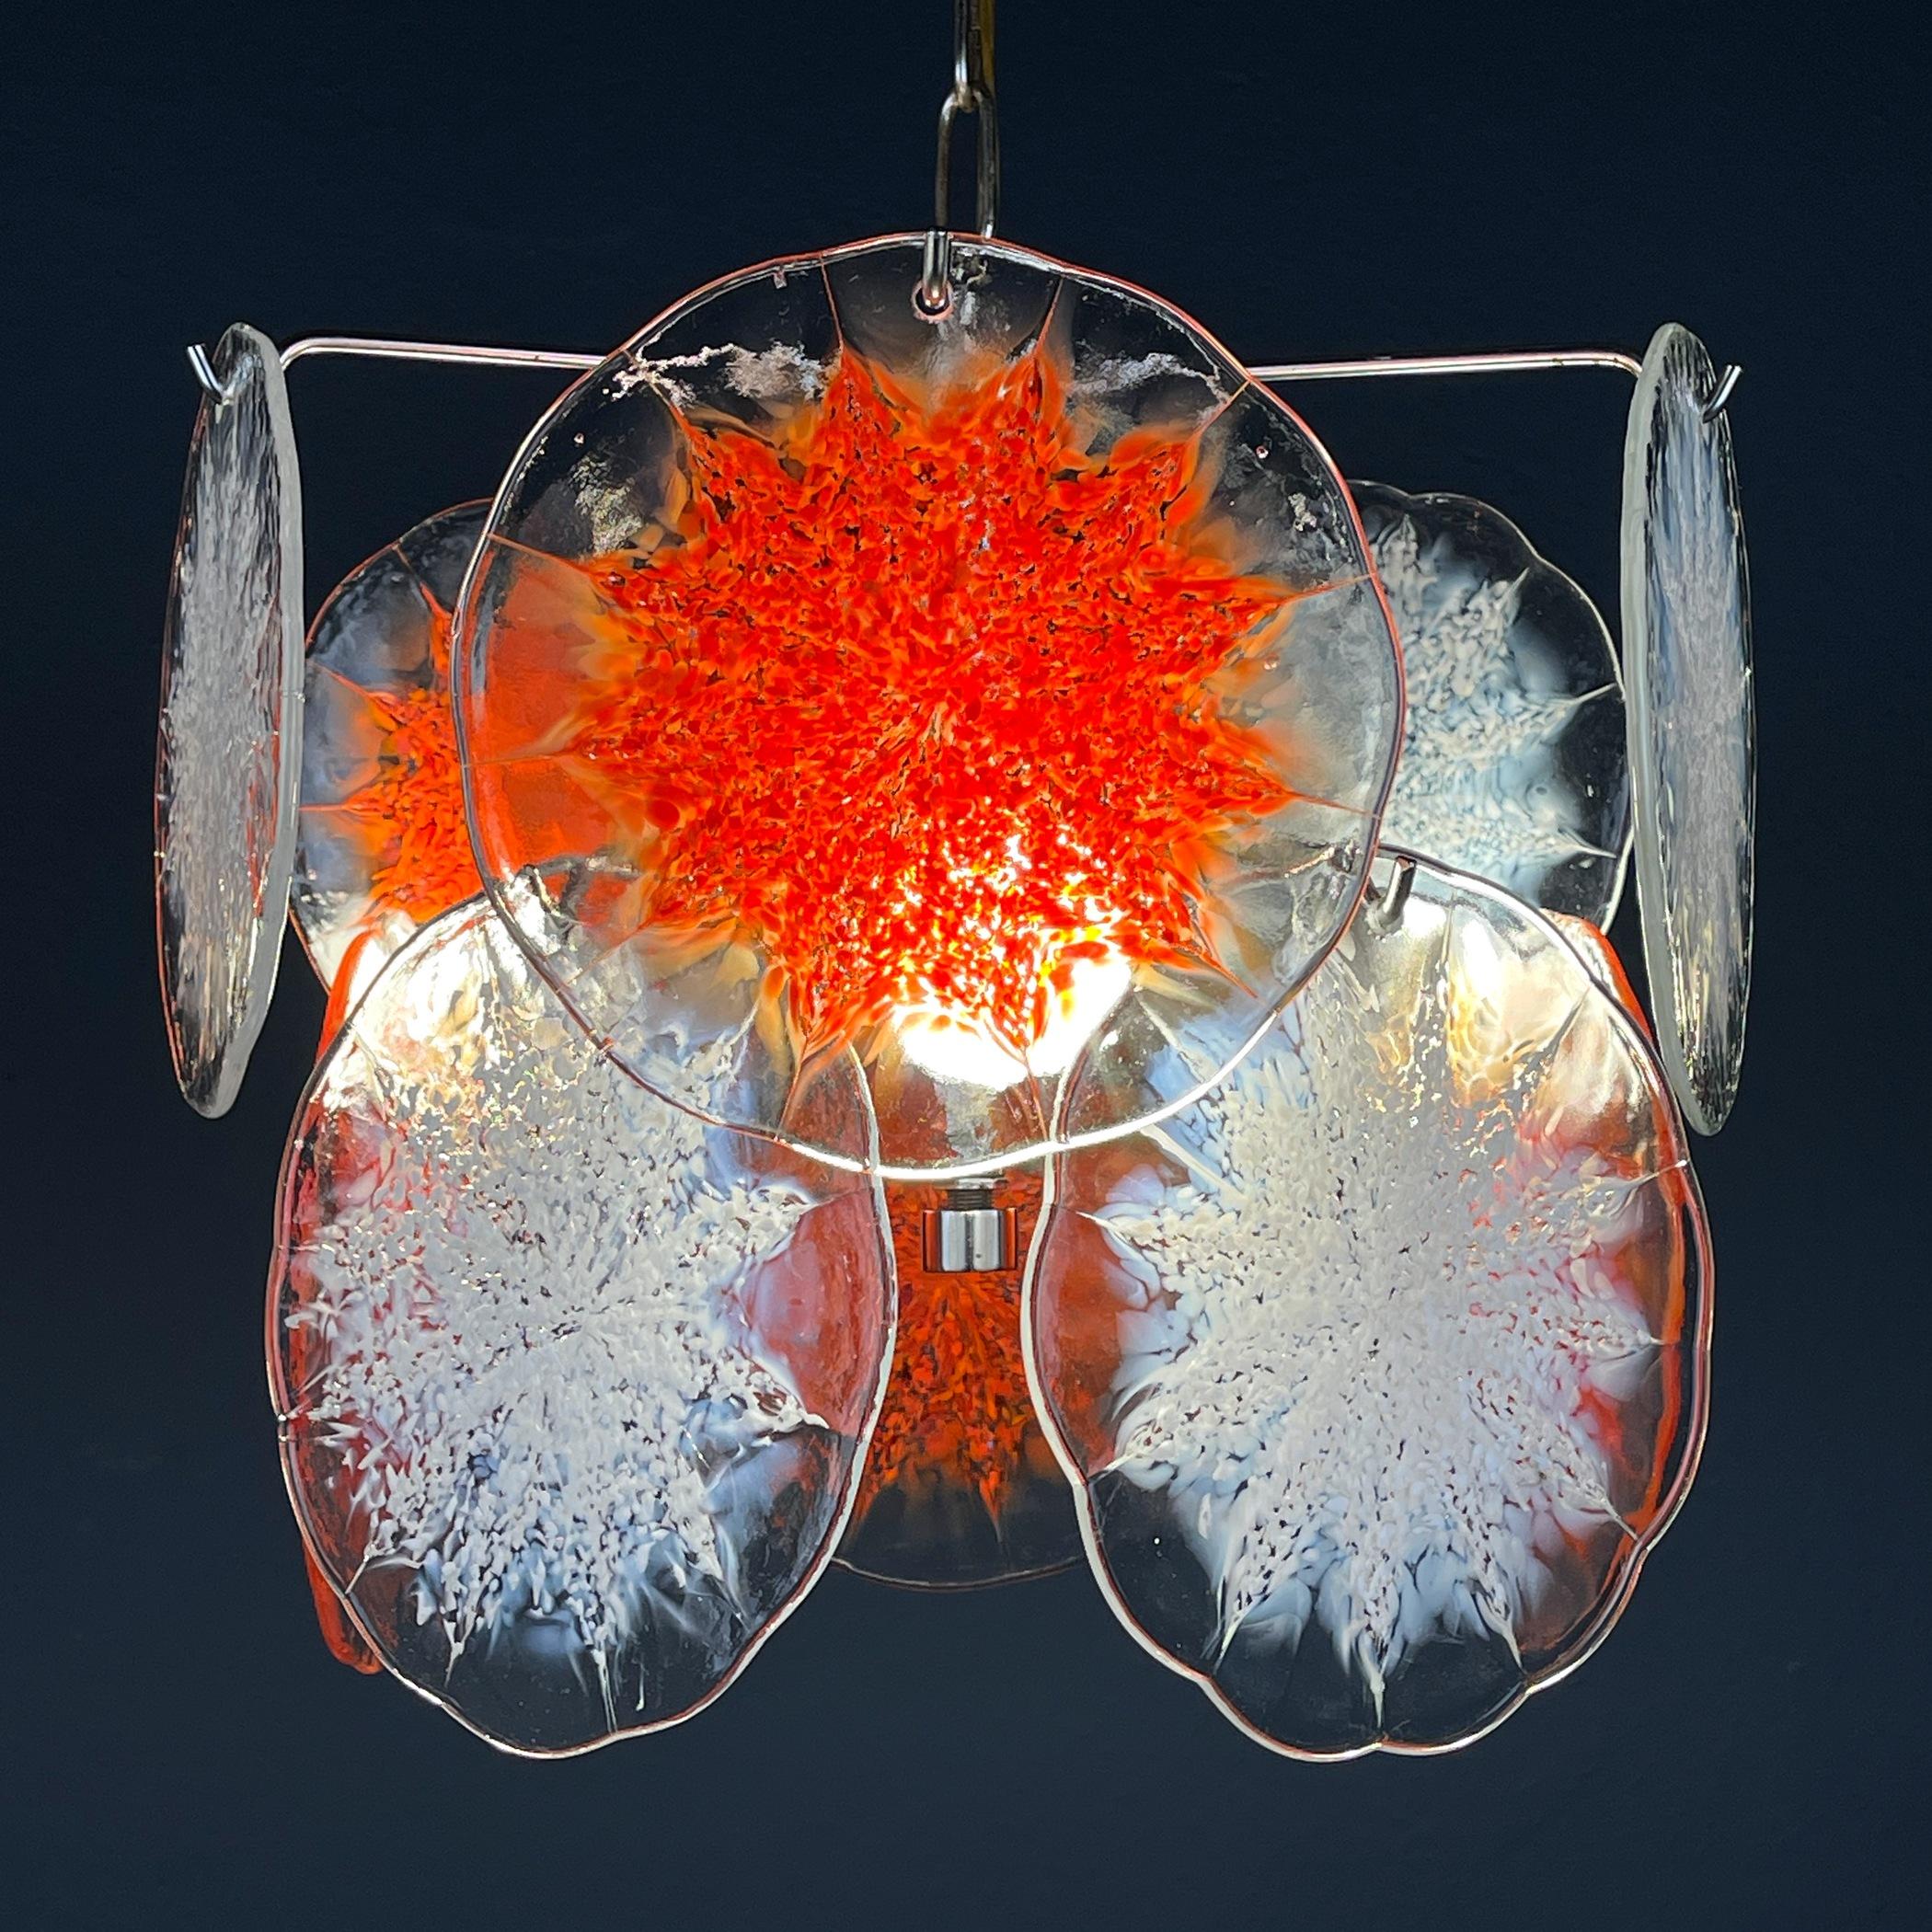 This stunning original Murano glass chandelier by Gino Vistosi is a true work of art and a wonderful piece for your home. The pendant lamp is made on the island of Murano near Venice, Italy, the world's most famous village and glassmaking community.